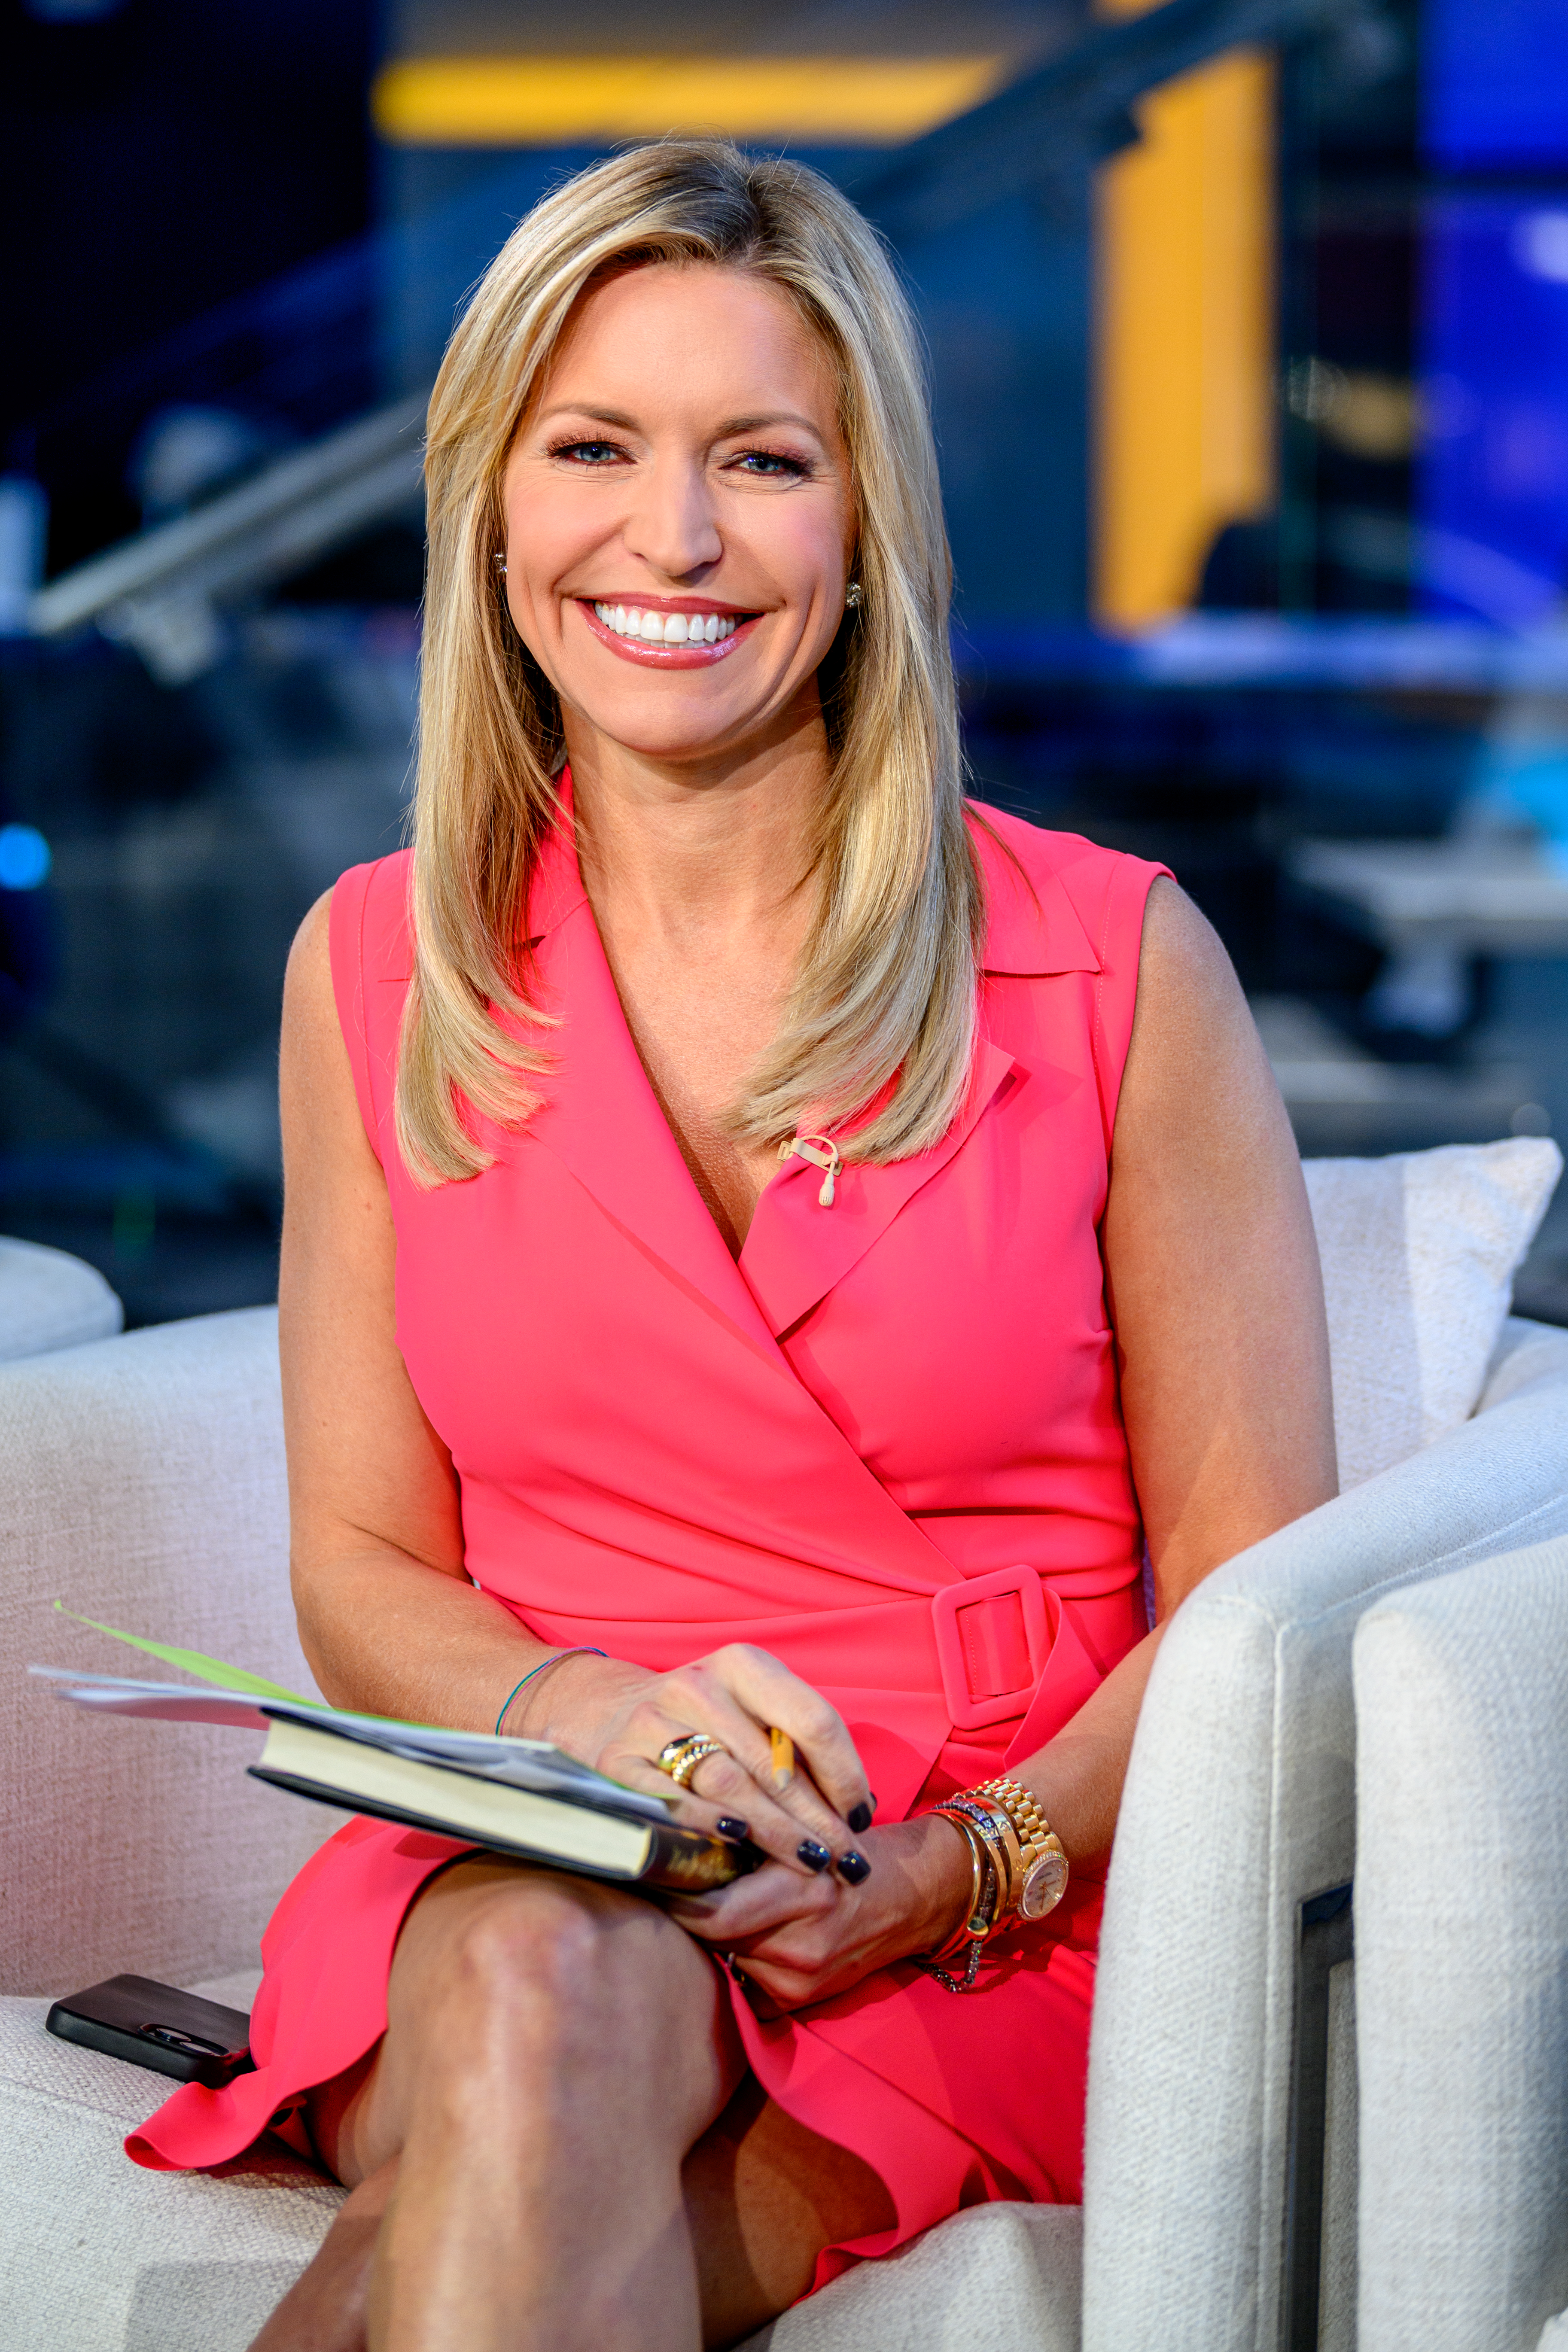 Ainsley Earhardt during an episode of "Fox & Friends" at Fox News Studios on March 7, 2023, in New York City. | Source: Getty Images